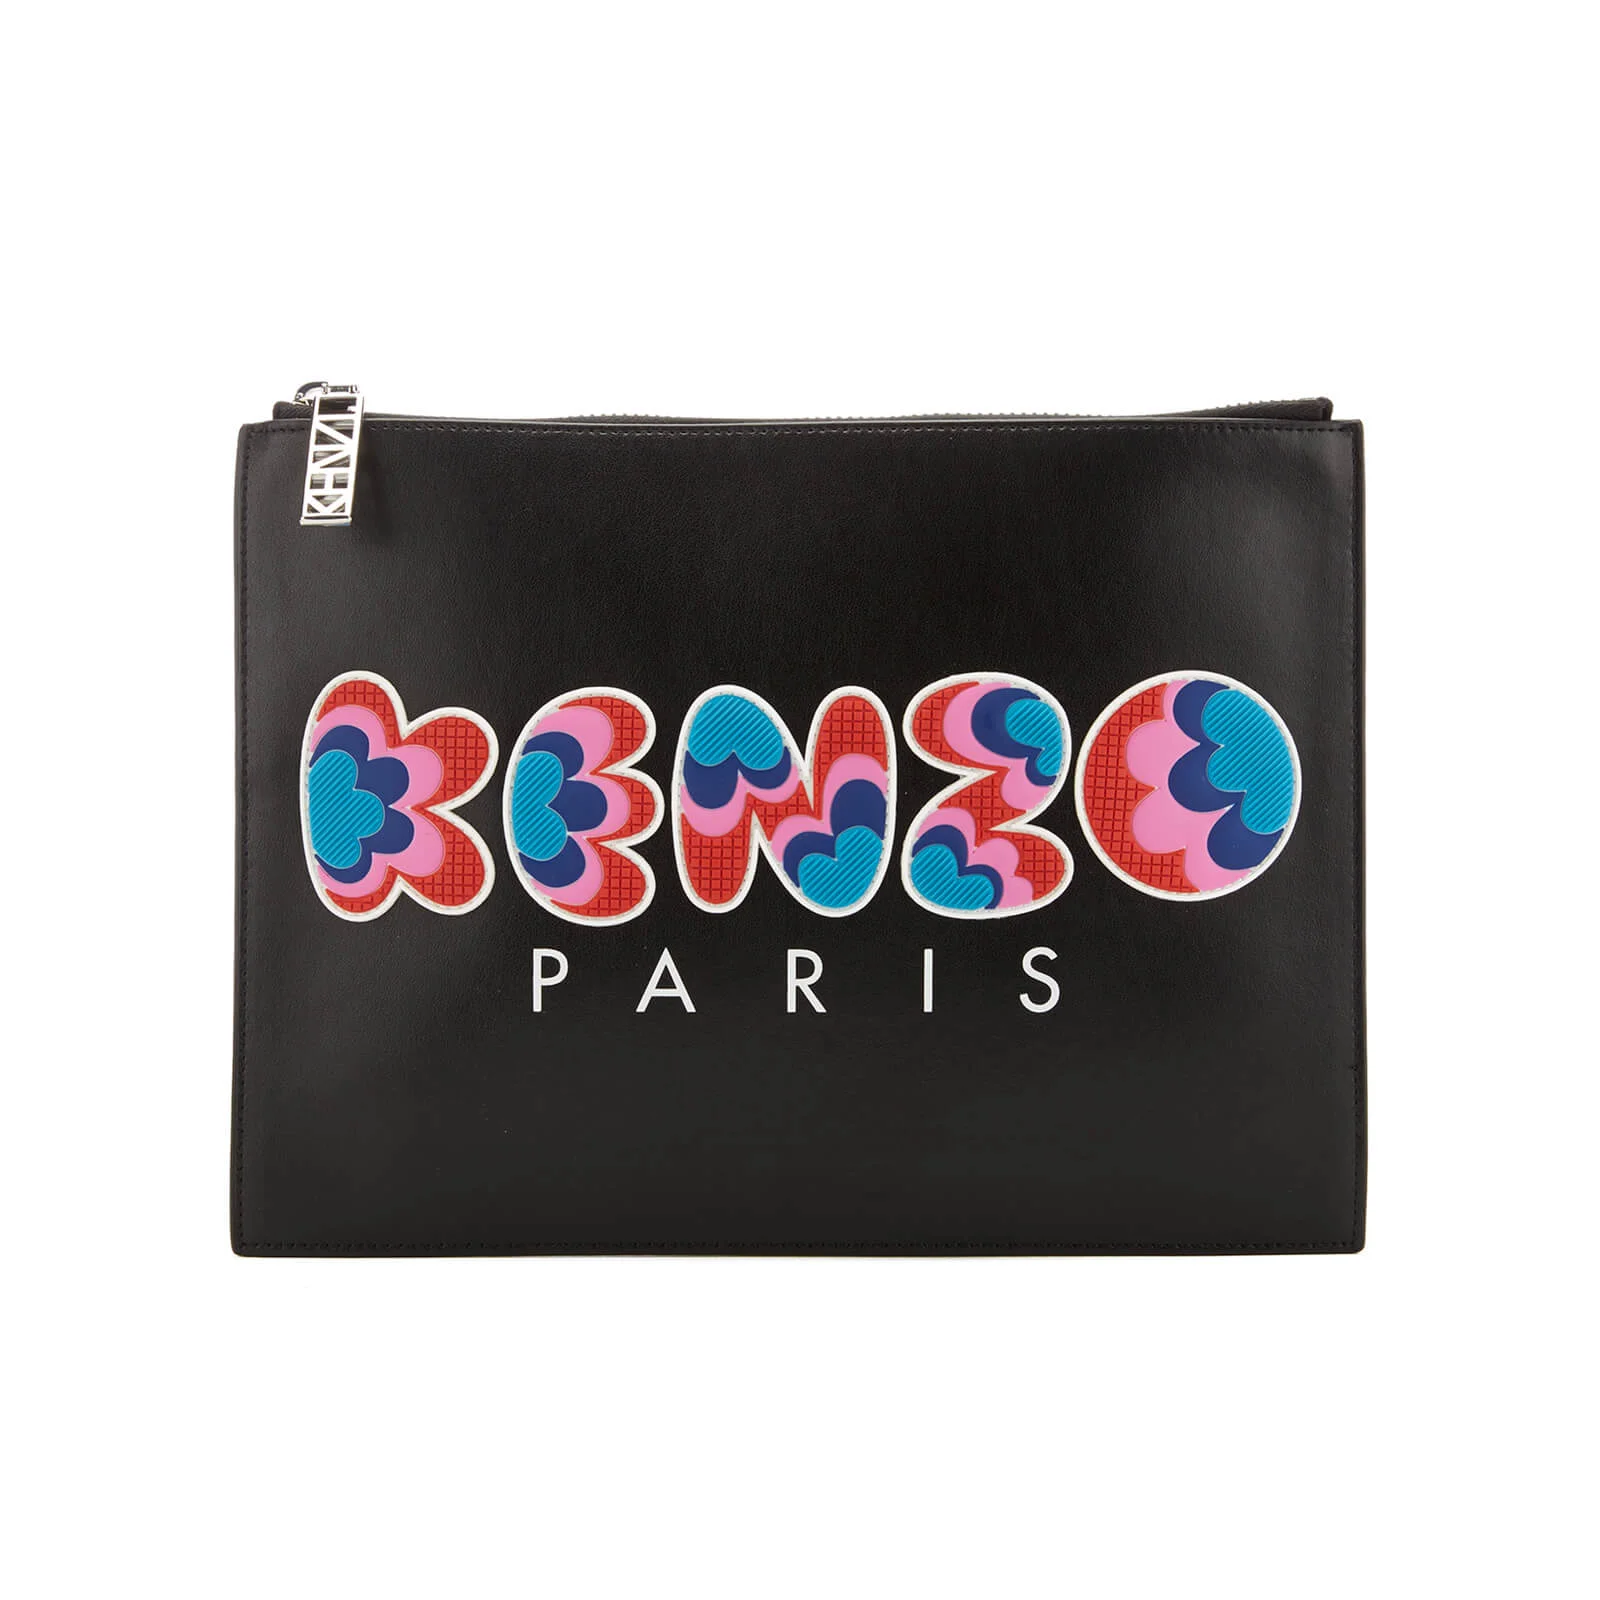 KENZO Women's Occasions A4 Pouch - Black Image 1